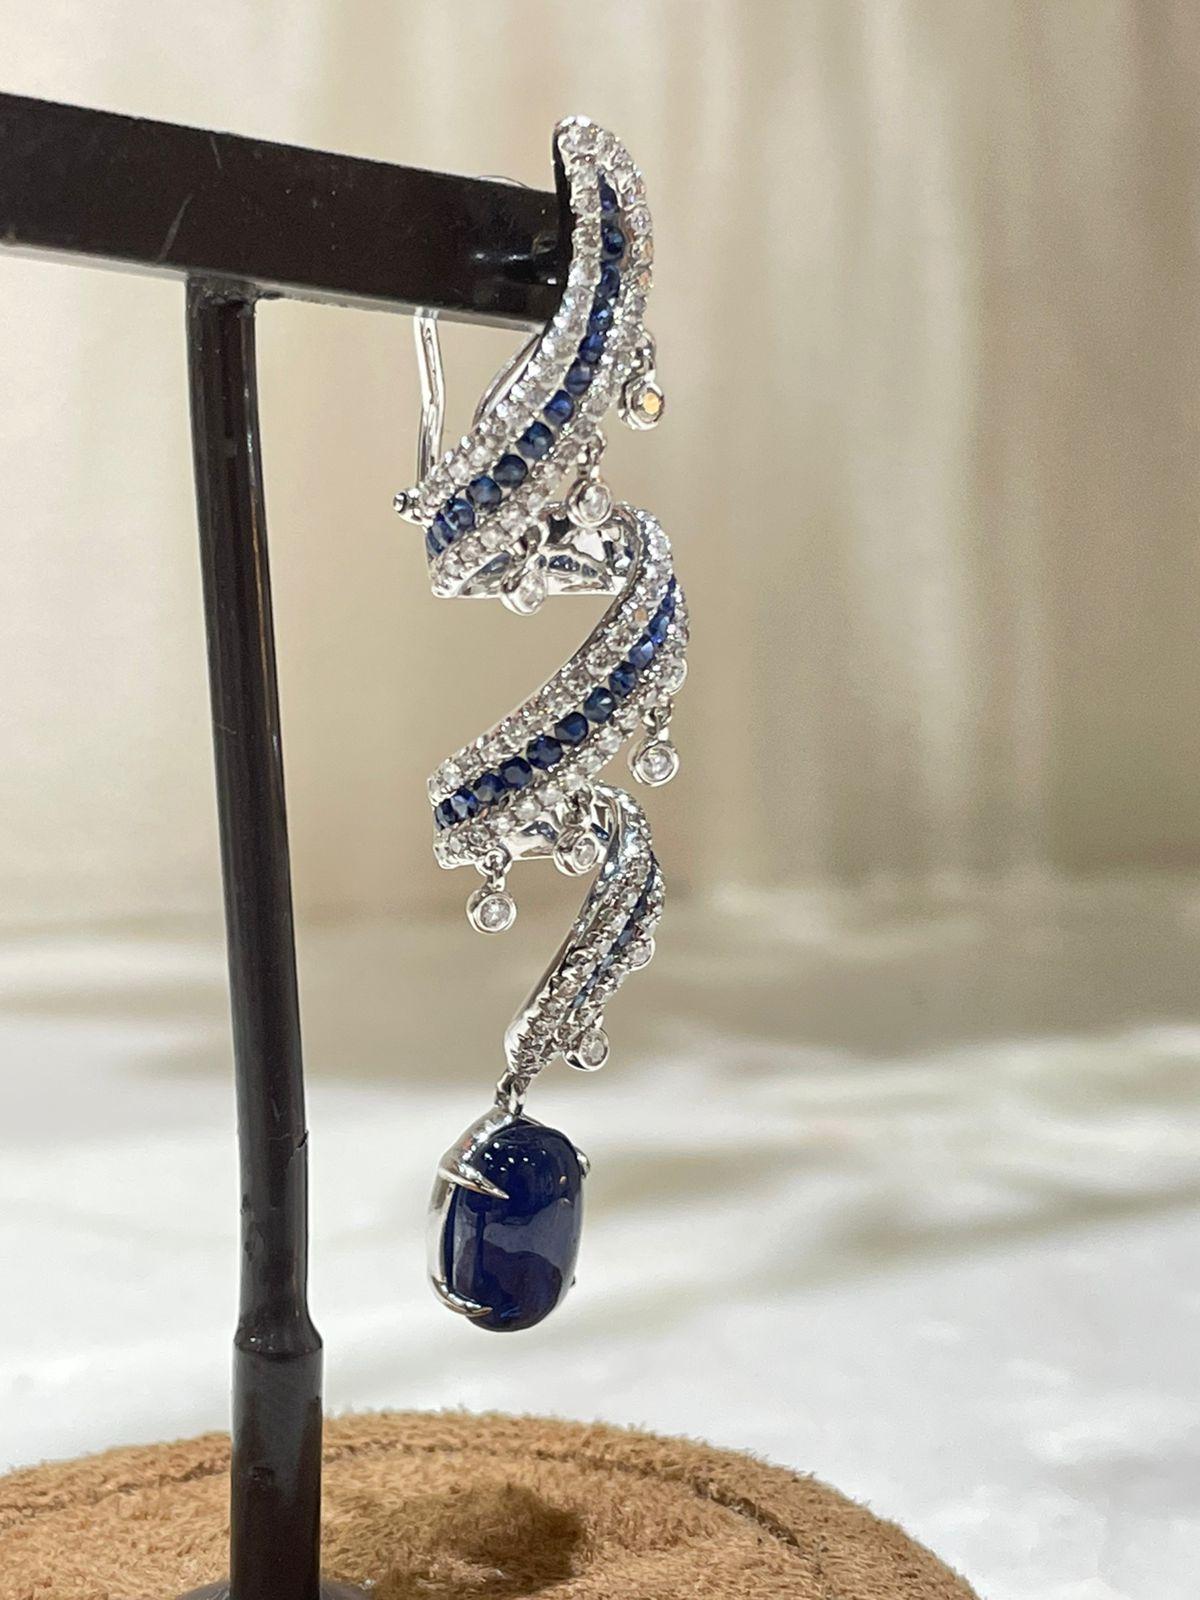 18k White Gold Dangling Earrings with Blue Sapphires and Round Cut Diamonds In New Condition For Sale In Abu Dhabi, Abu Dhabi